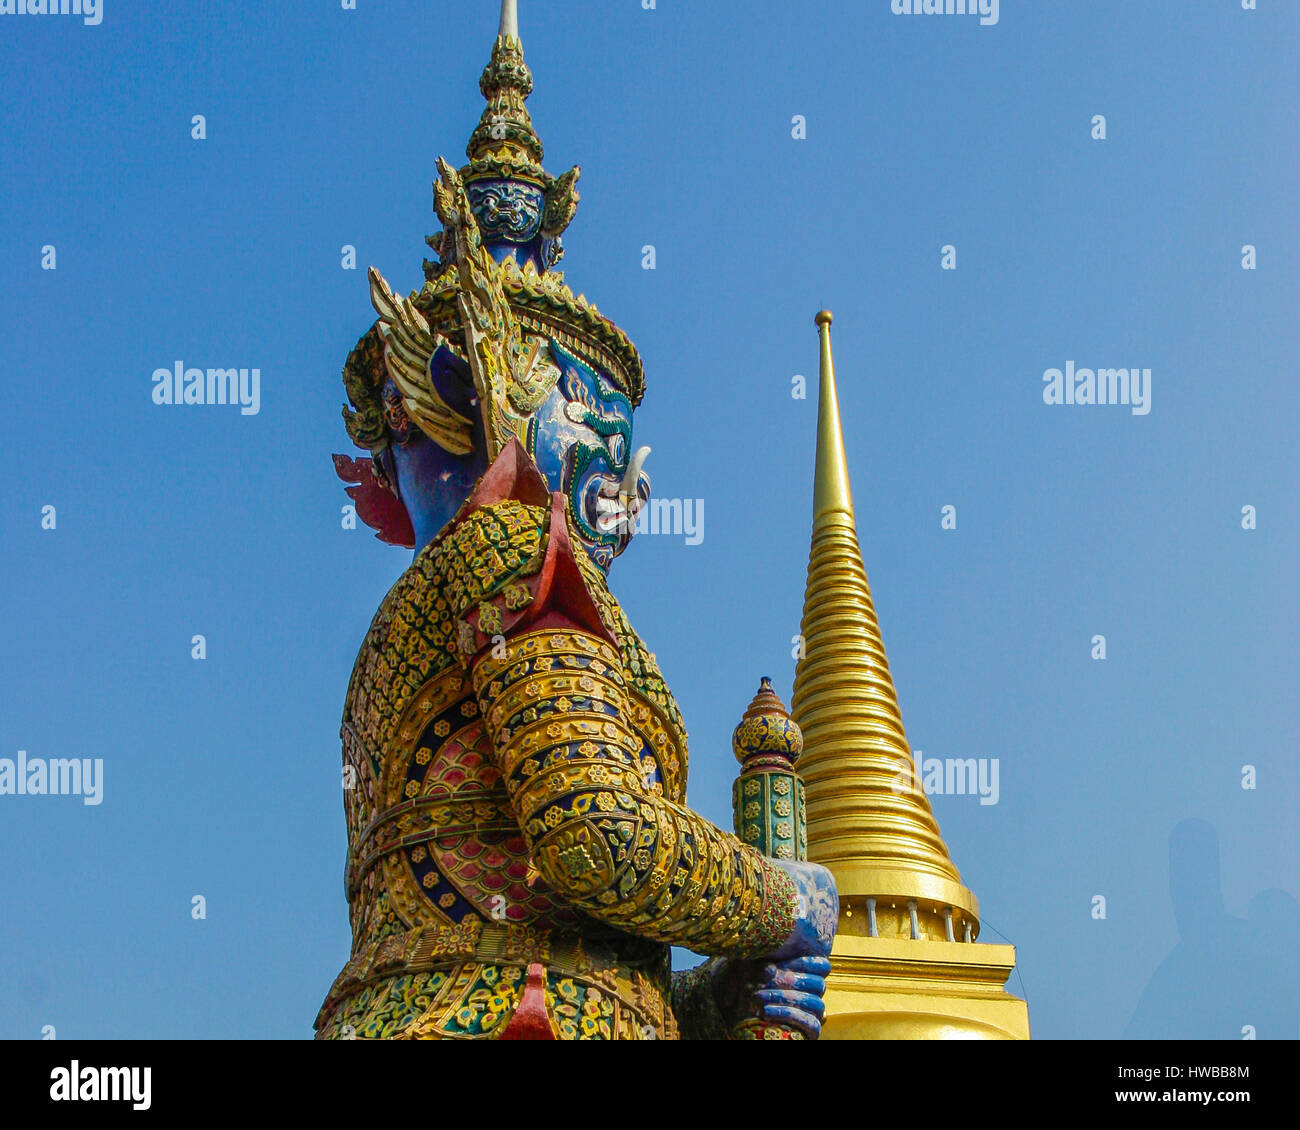 November 14, 2006 - Bangkok, Thailand - A gate-keeping Giant (Yaksa Tavambal) in a costume of colored glazed tiles, 6 m. (19 Â½ ft) tall, guard the entrance to The Gallery (Phra Rabiang) of the most sacred Temple of the Emerald Buddha (Wat Phra Kaew) in the Grand Palace Complex, Bangkok, Thailand. Thailand has become a favorite tourist destination. (Credit Image: © Arnold Drapkin via ZUMA Wire) Stock Photo